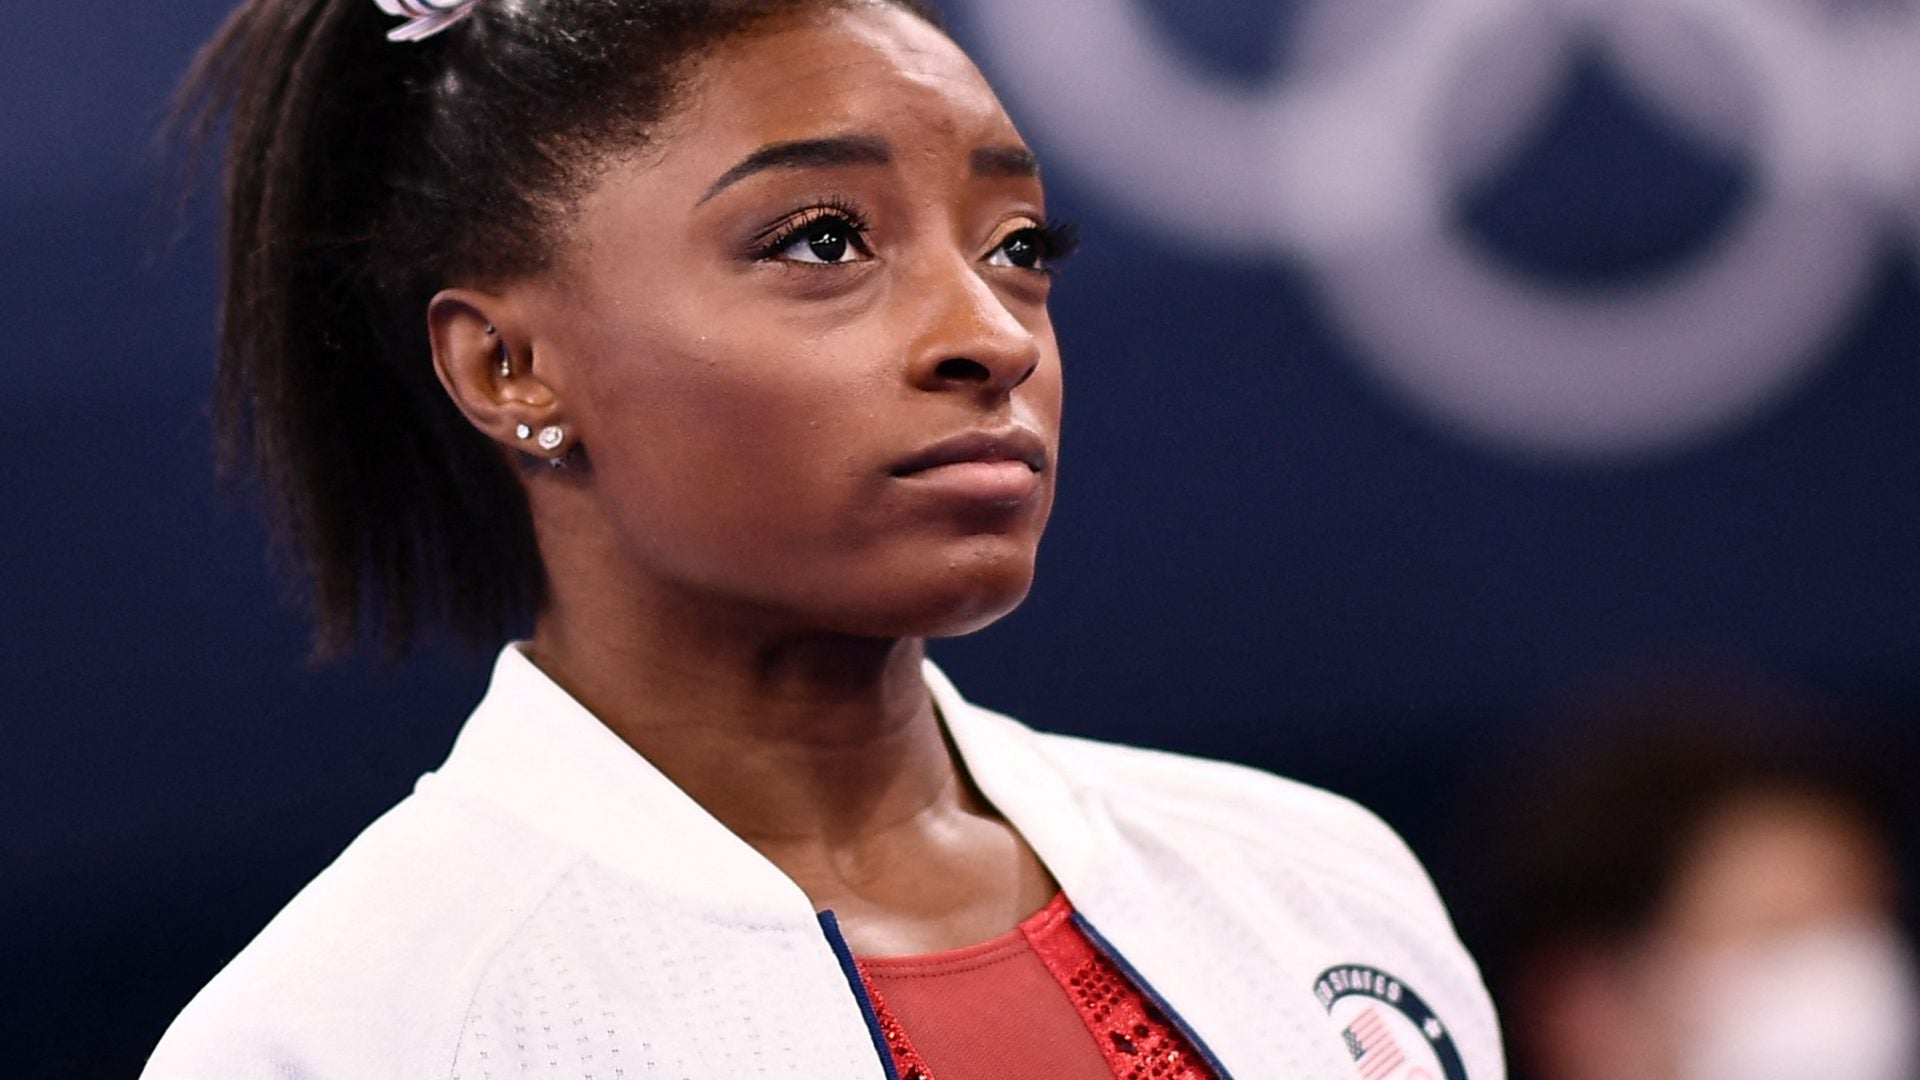 Simone Biles Withdraws From Women's Team Gymnastics Finals At Olympics